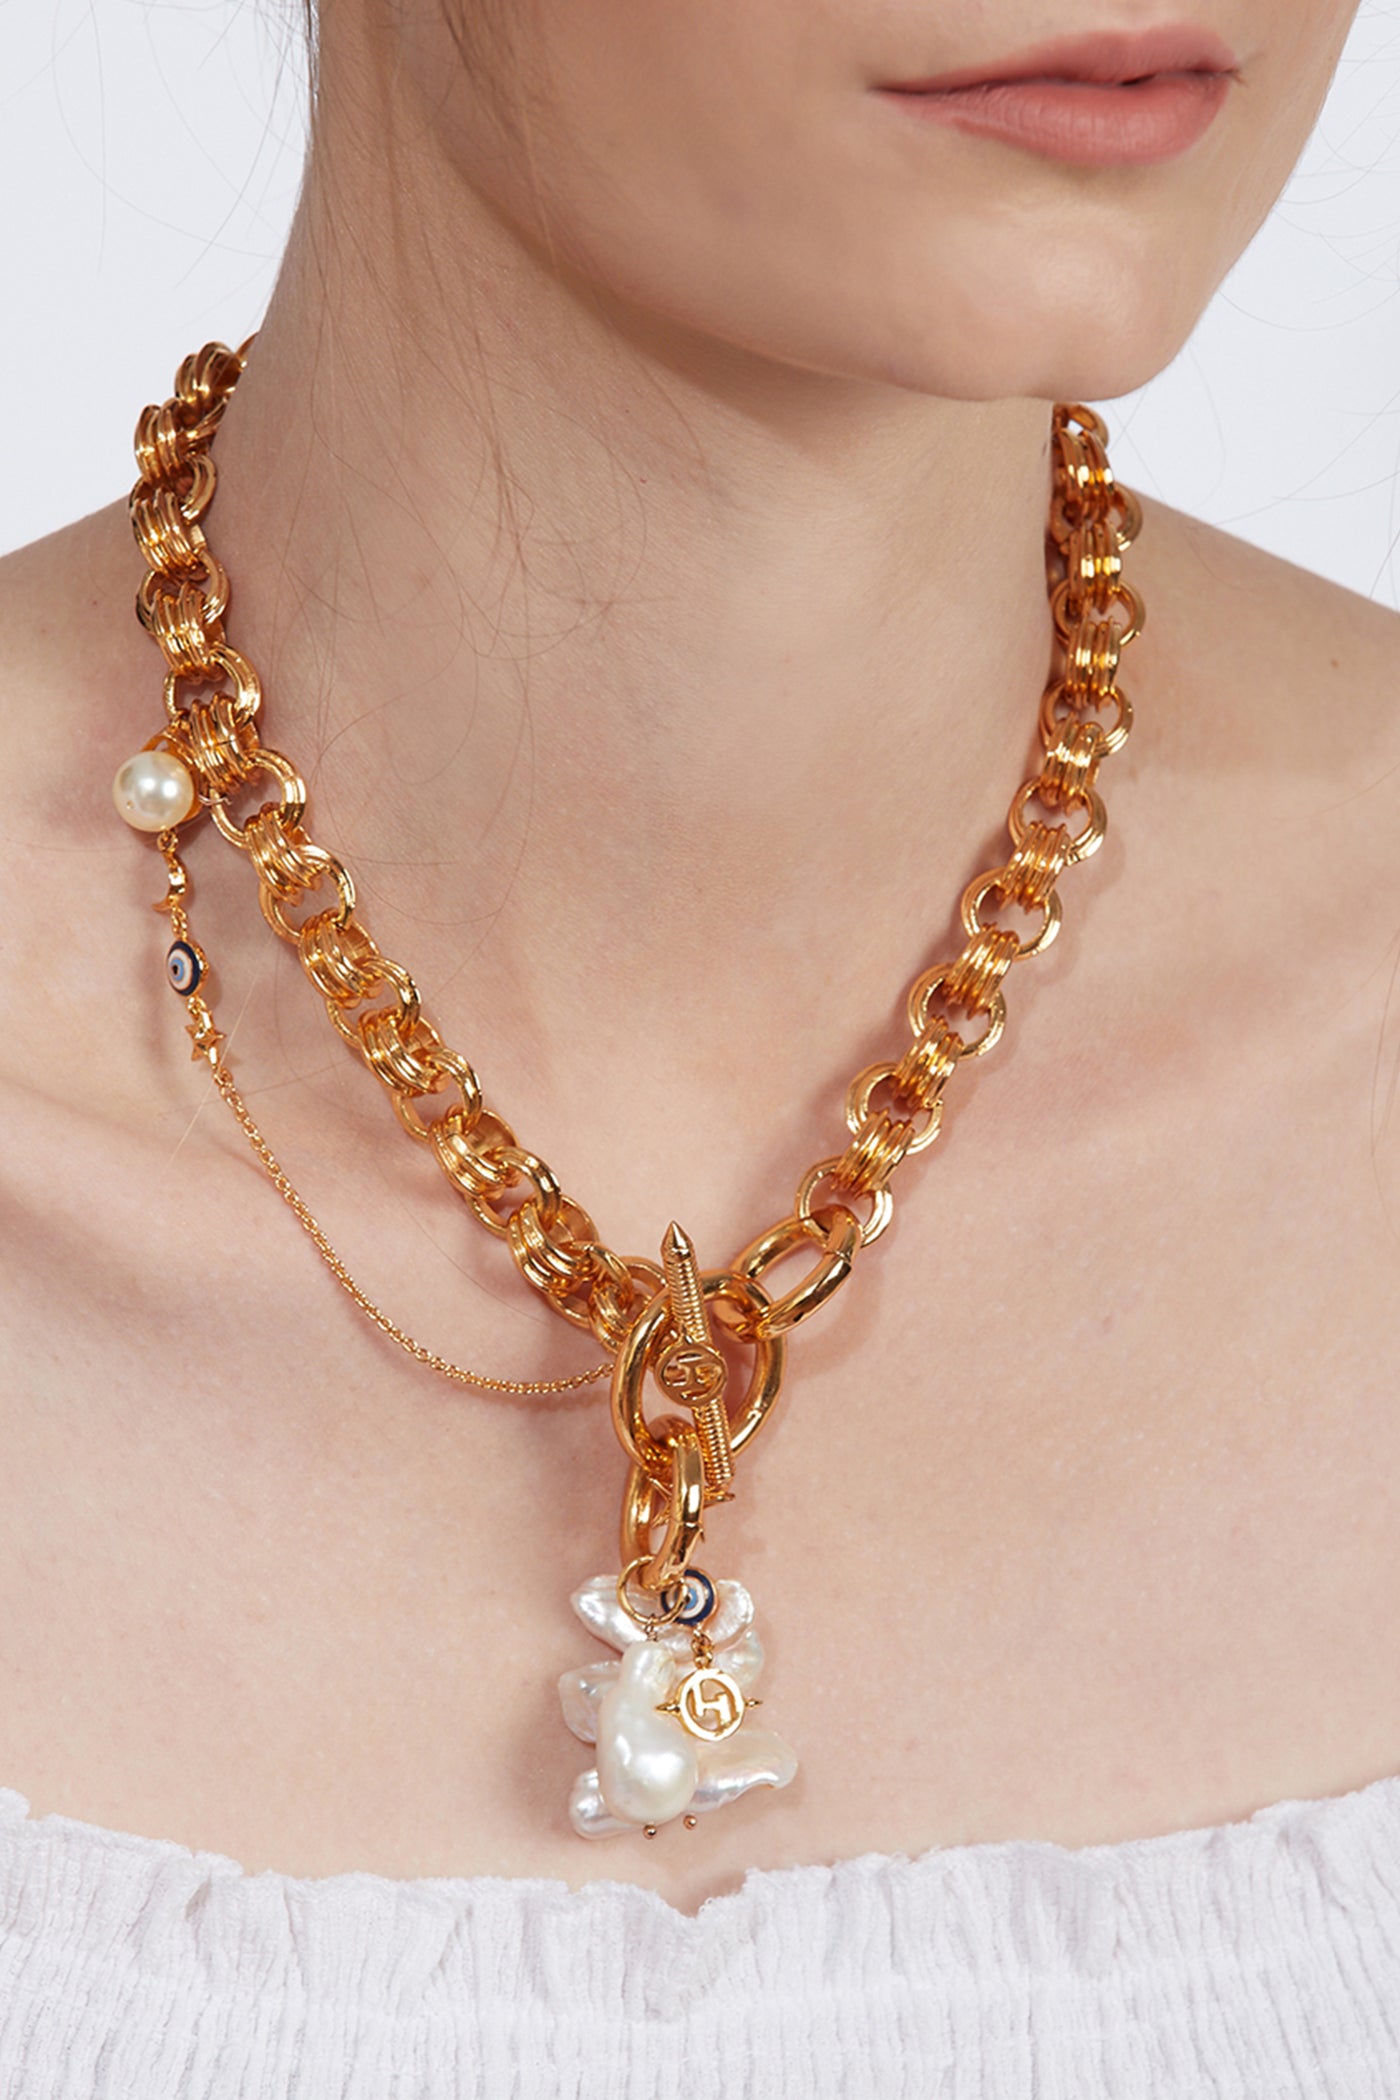 outhouse jewellery Pearls d'Amour Necklace gold online shopping melange singapore designer wear fashion jewellery